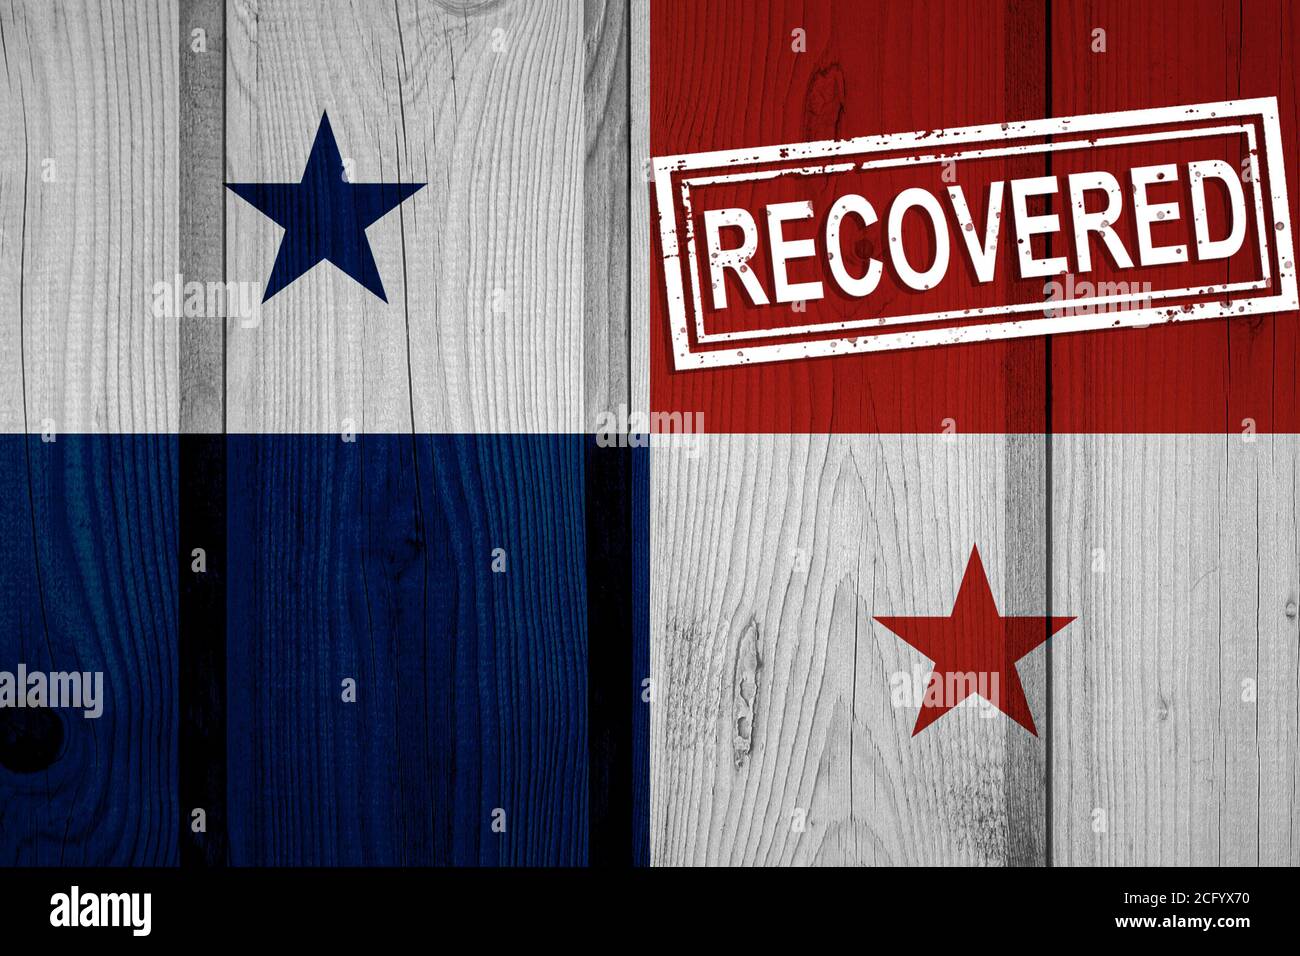 flag of Panama that survived or recovered from the infections of corona virus epidemic or coronavirus. Grunge flag with stamp Recovered Stock Photo